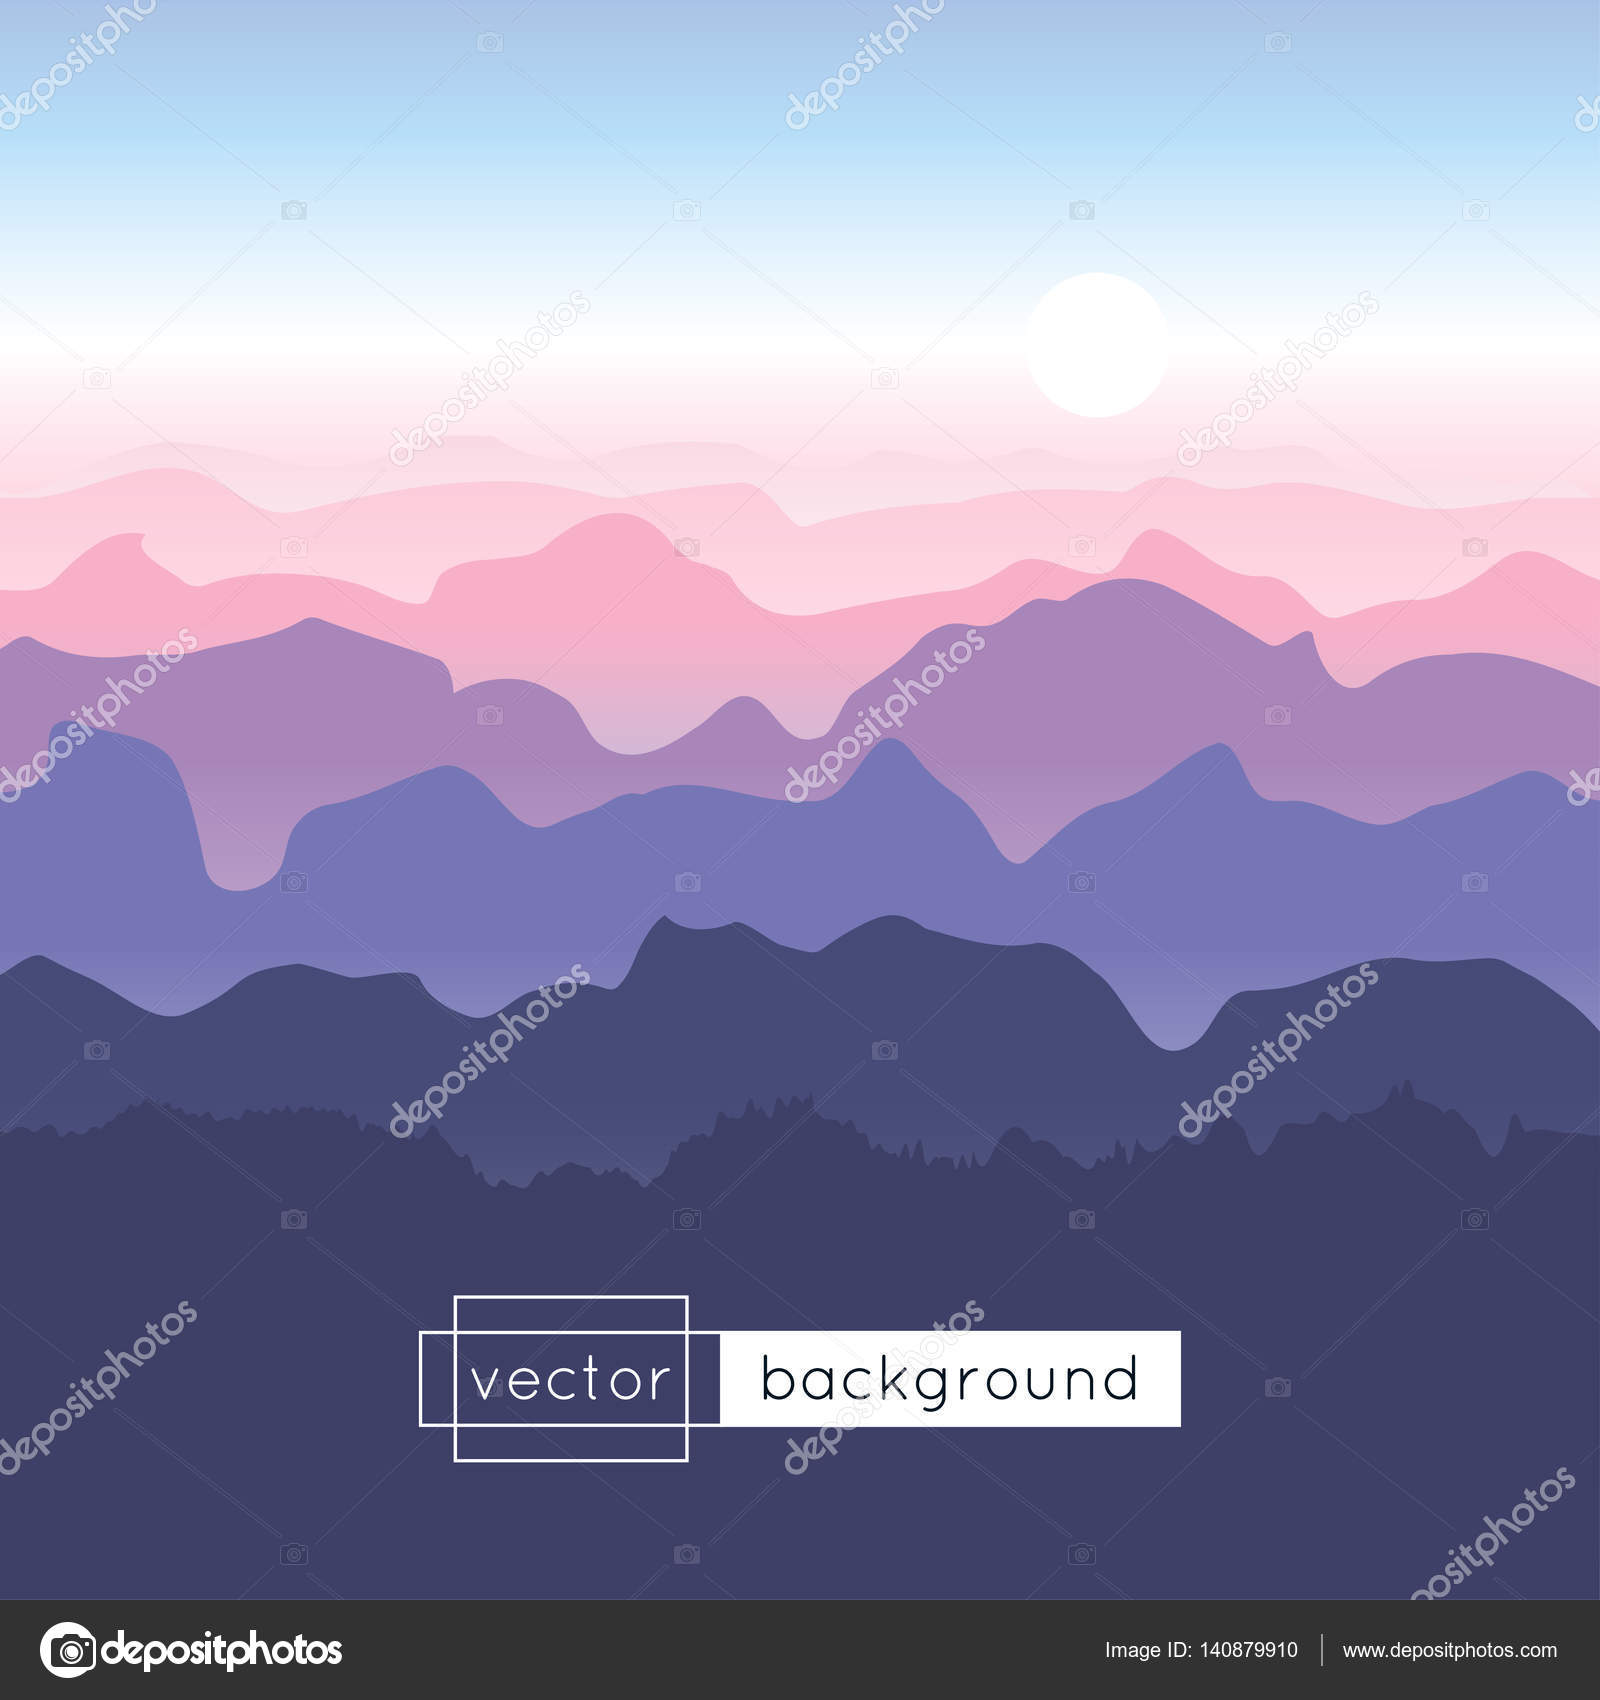 Game background Vector Art Stock Images | Depositphotos